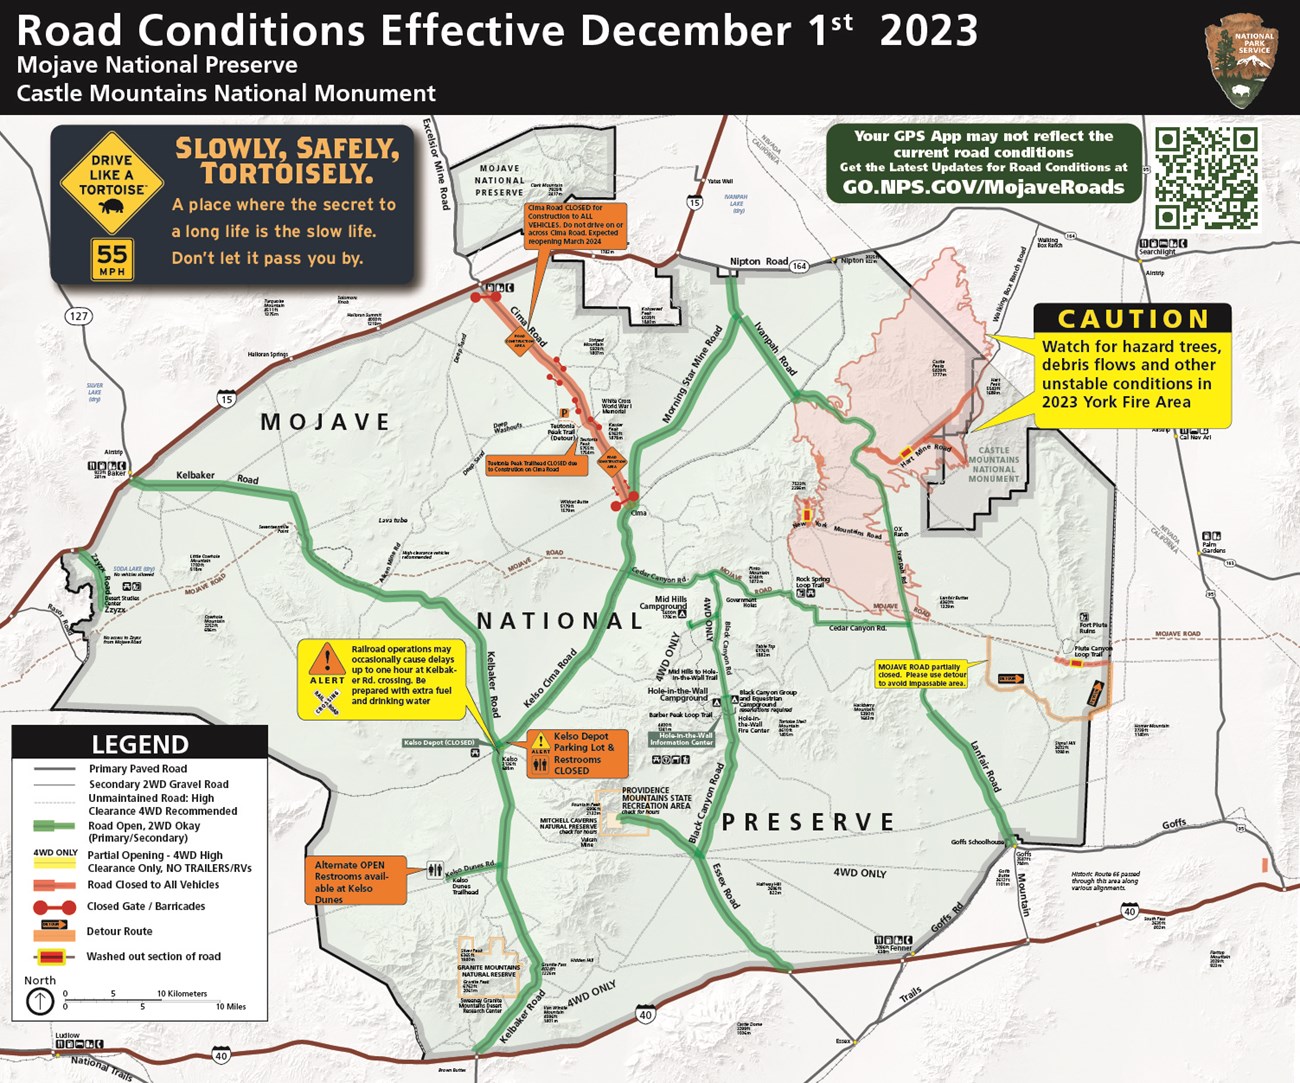 Road Conditions Map of Mojave National Preserve. All Roads open except for Cima Road, Hart Mine Road, and Upper Carruthers Canyon Road. Kelso Depot Parking Lot and Restrooms Closed.